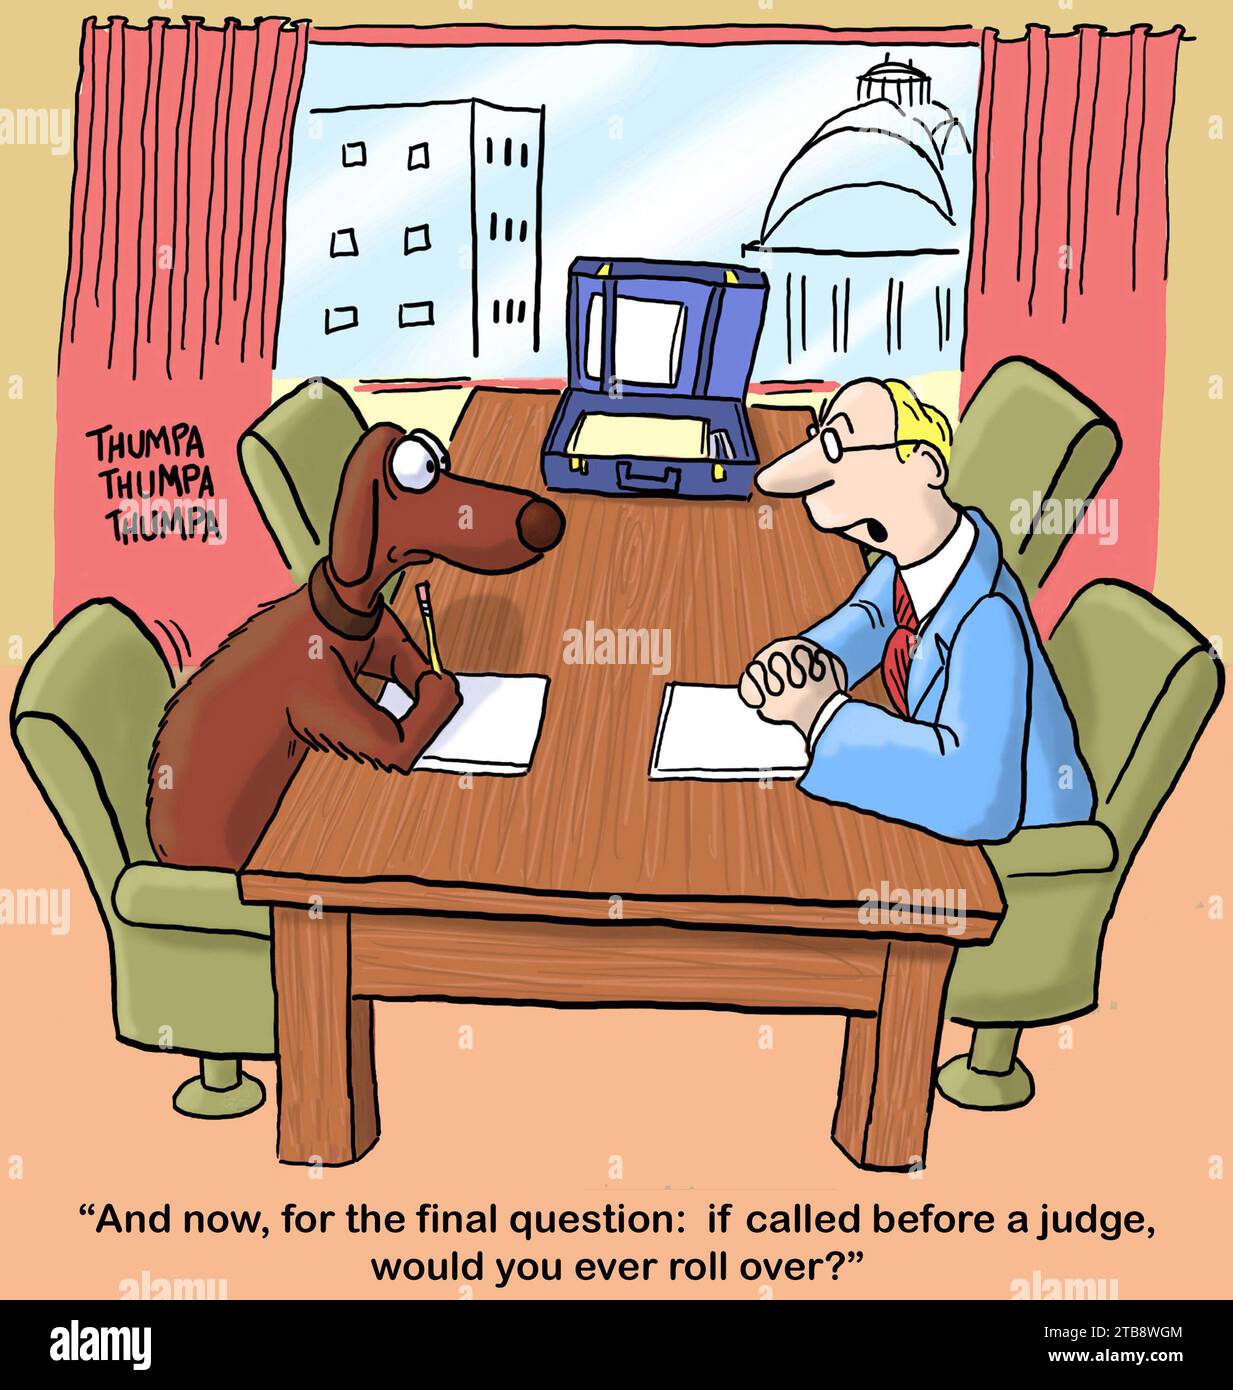 Color cartoon of a lawyer asking his dog client if, called before a judge, it will roll over. Stock Photo